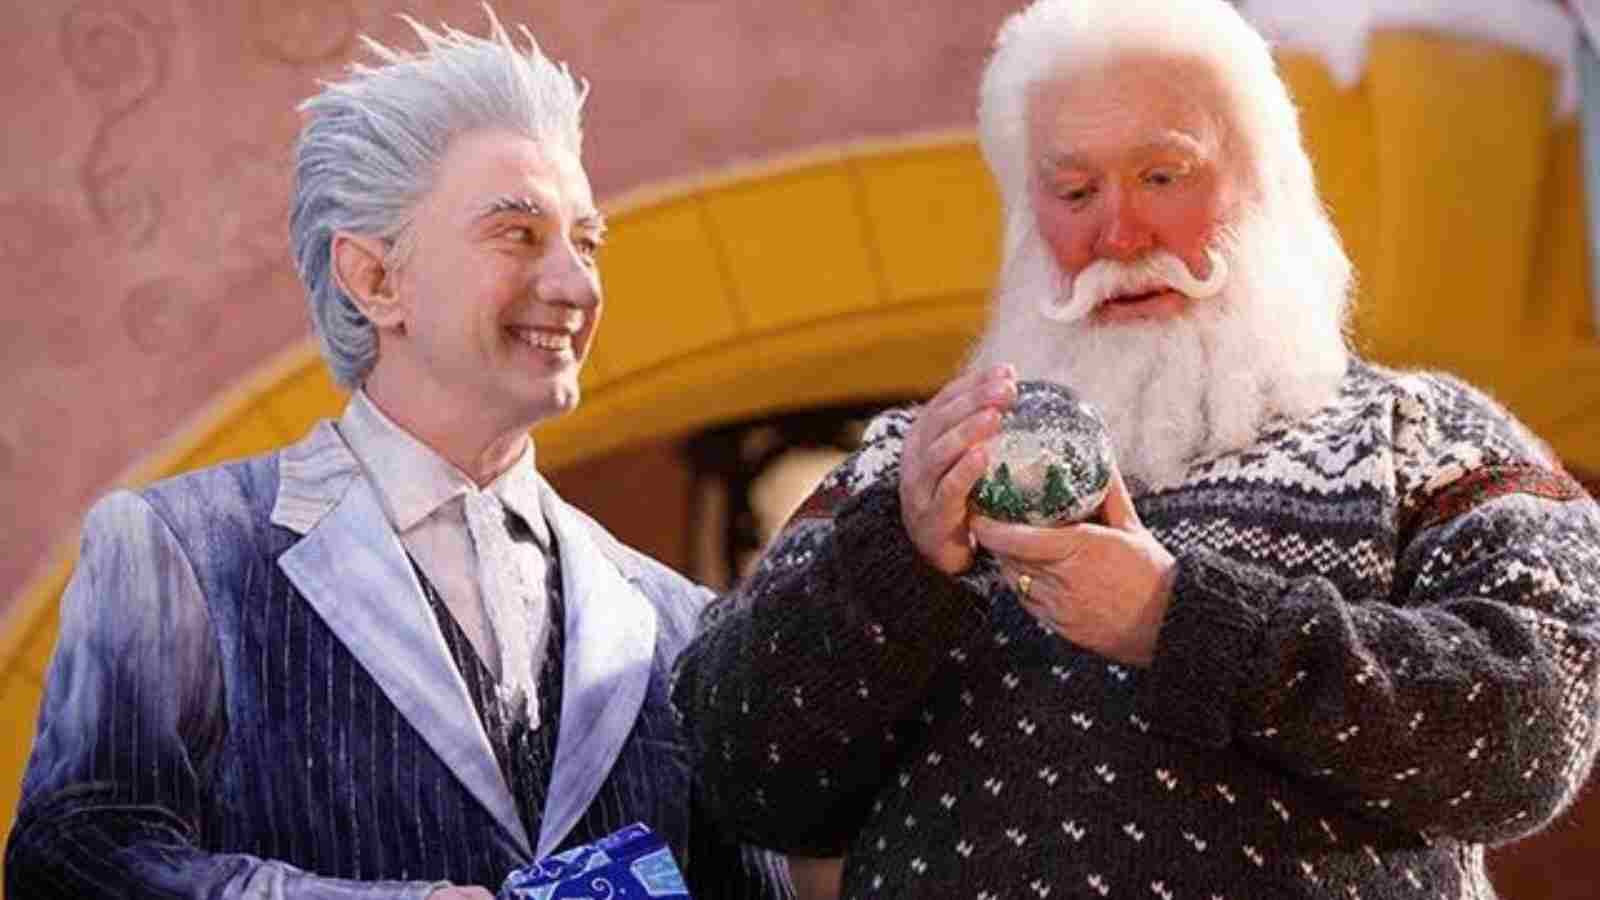 Tim Allen and Martin Short in 'The Santa Clause 3'